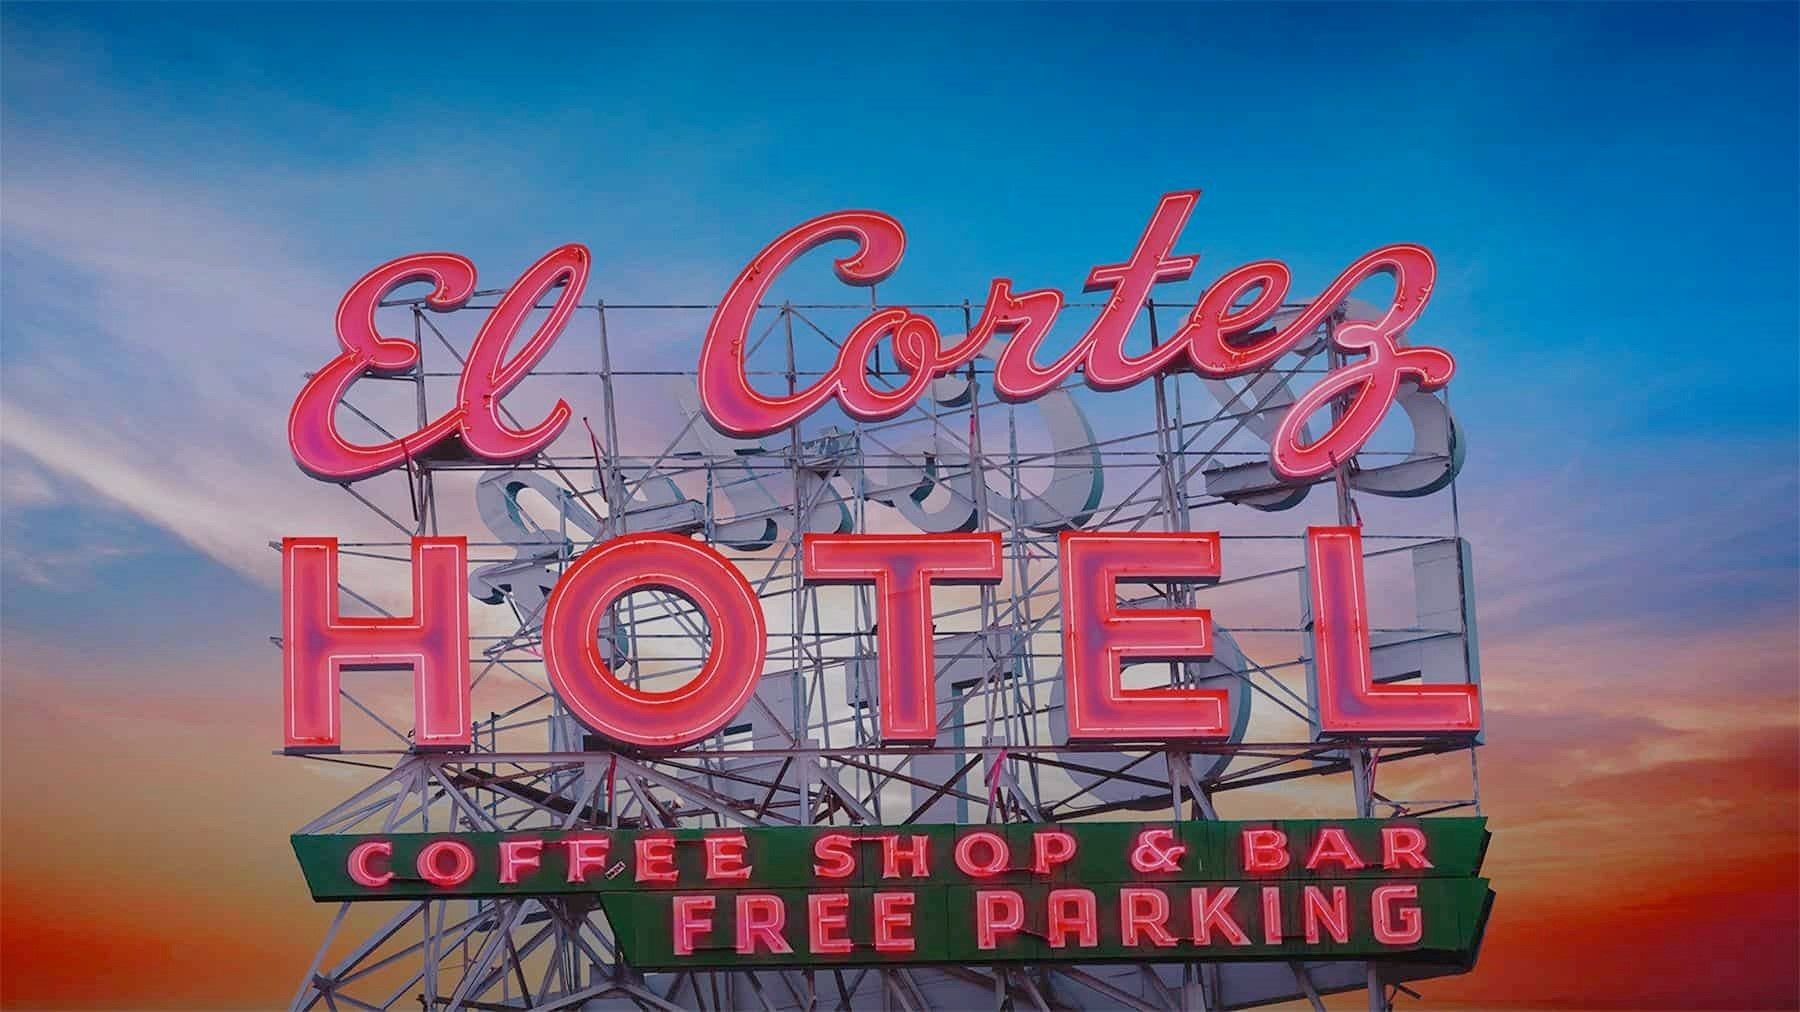 ICE London says ‘Cheers to 80-years’ in presentation to El Cortez owner Kenny Epstein